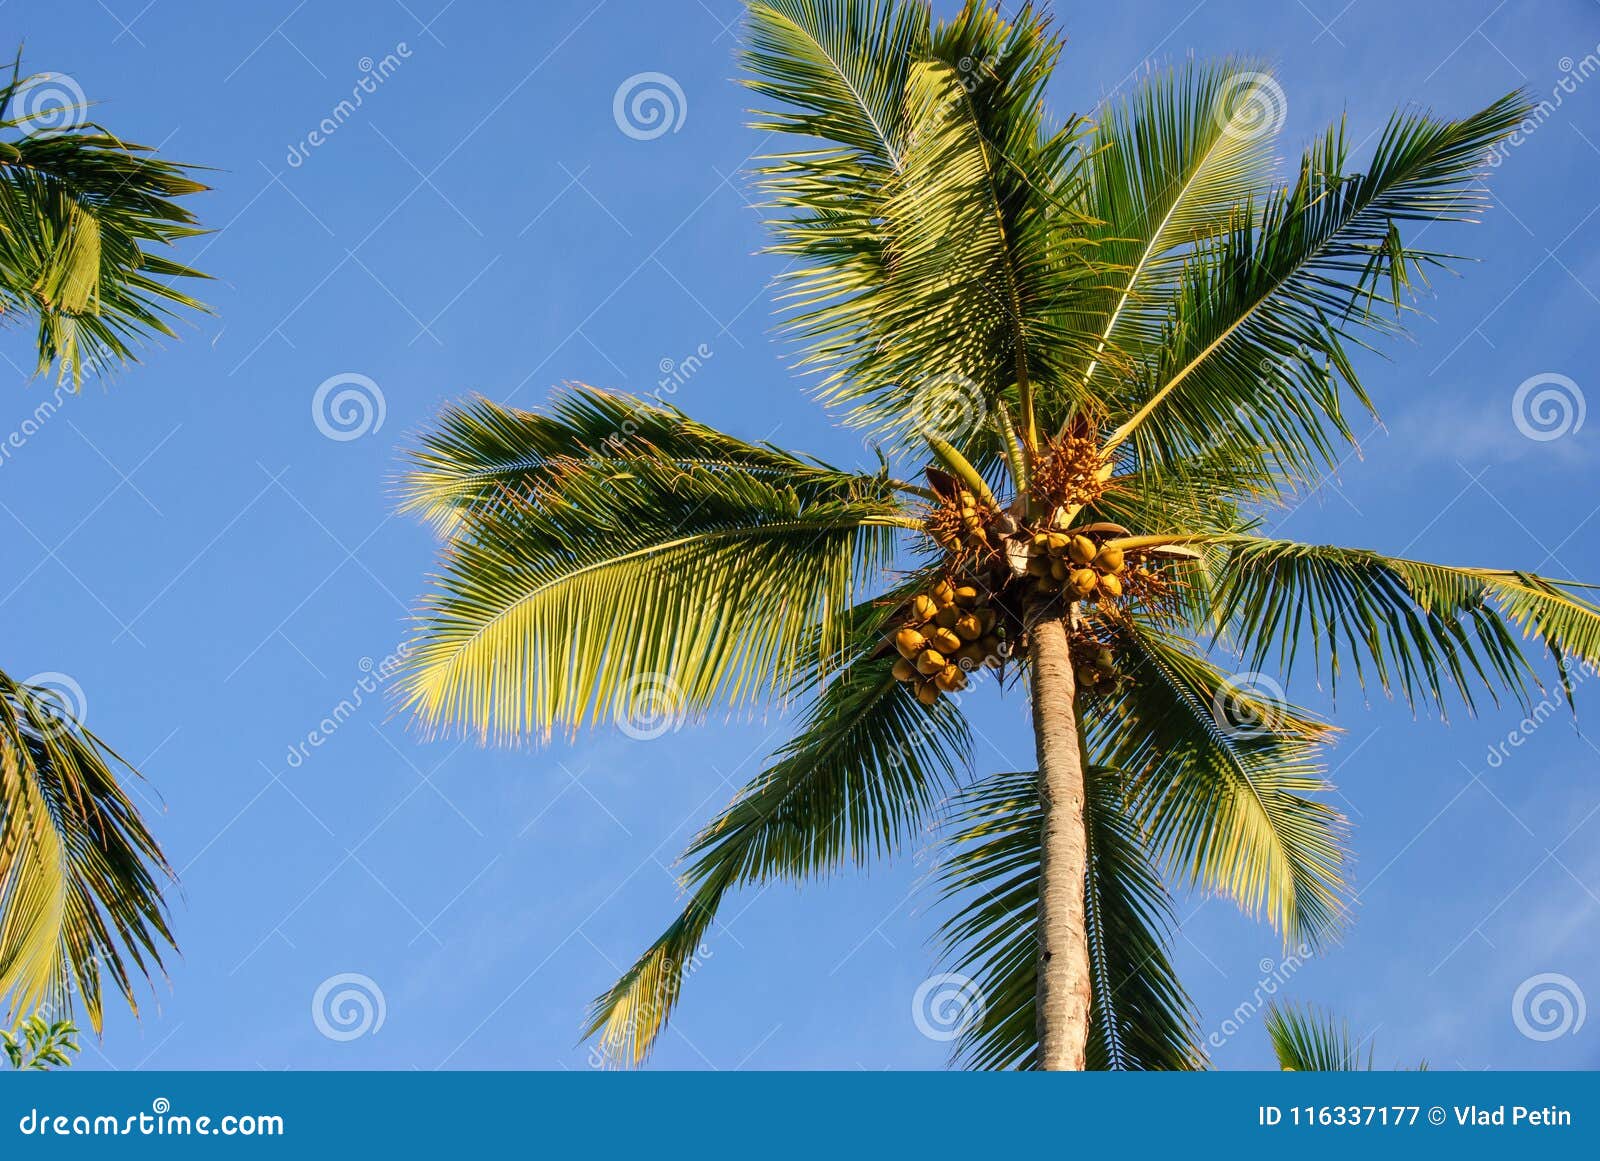 Bottom view of a beautiful palm tree with blue sky